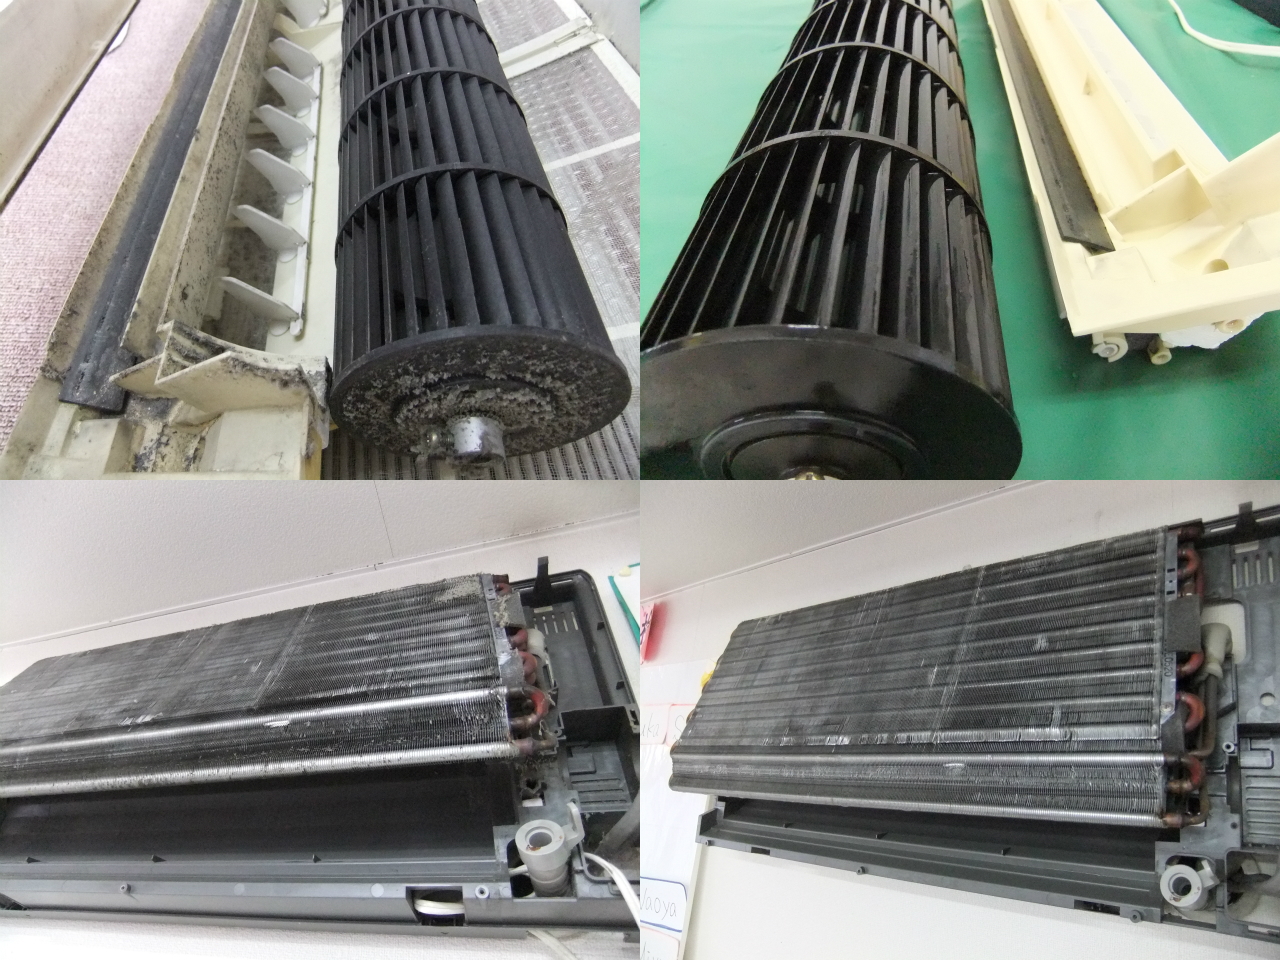 http://ajras.net/images/120207-aircon3.jpg